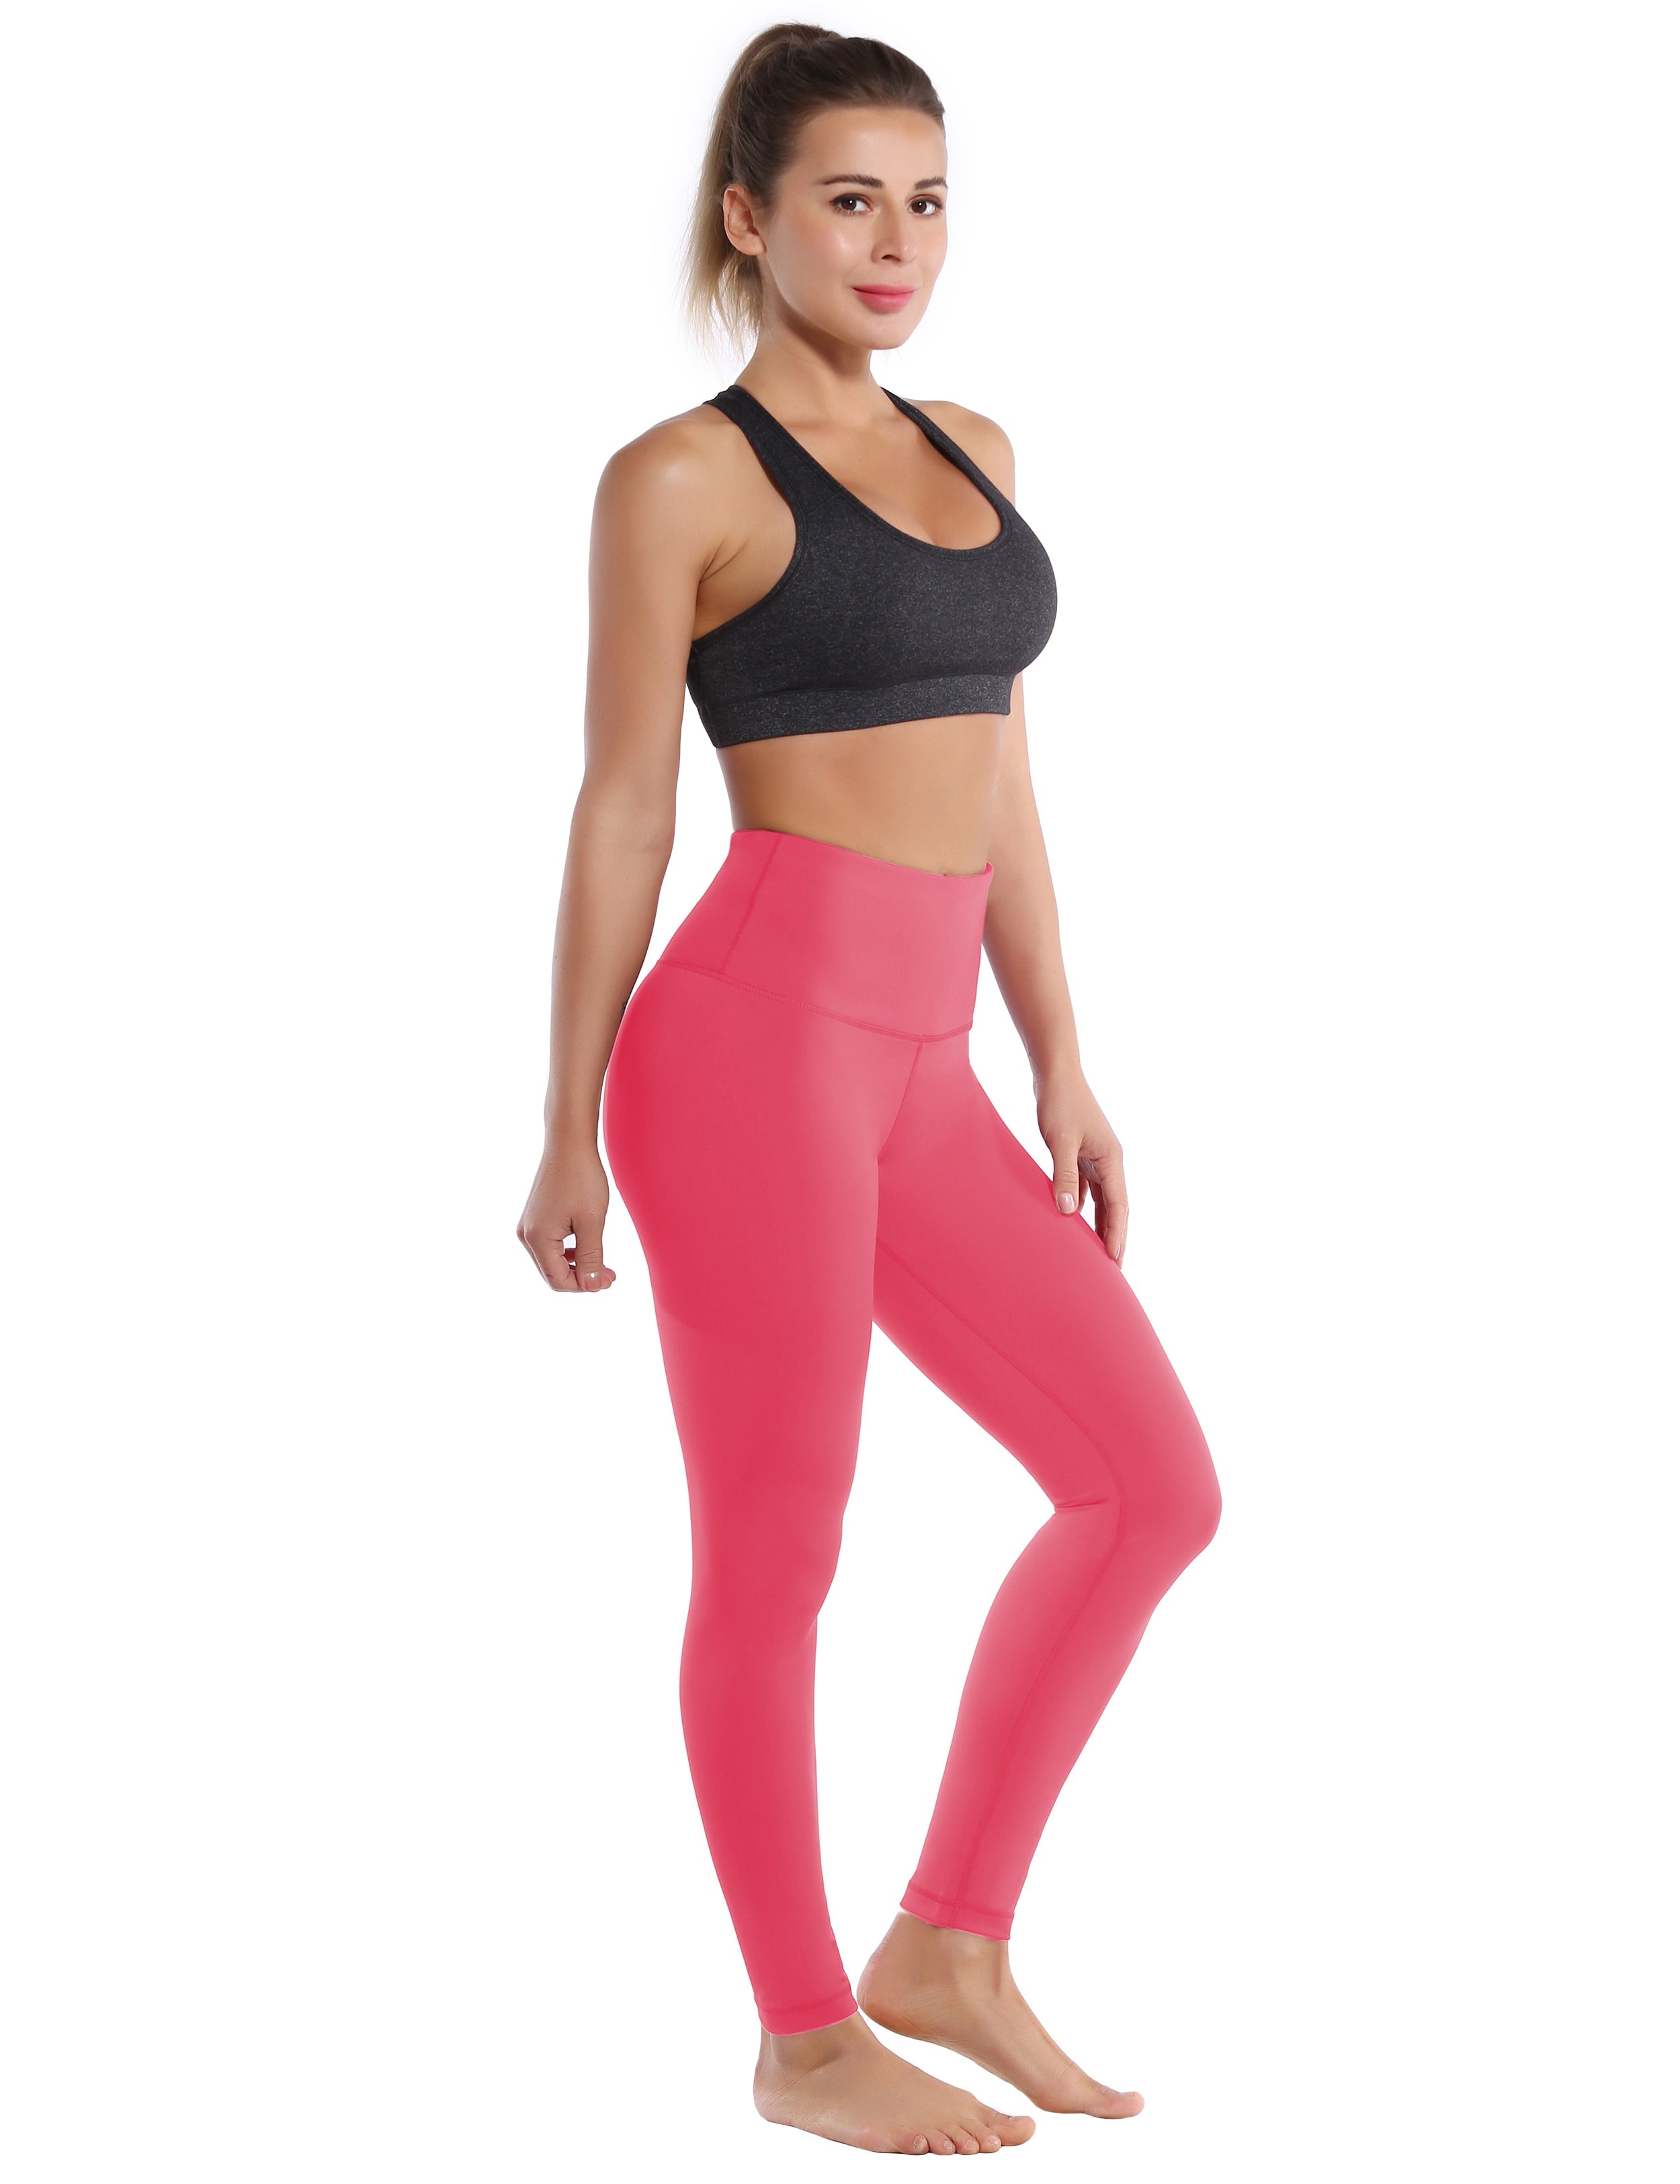 High Waist Jogging Pants rosecoral 75%Nylon/25%Spandex Fabric doesn't attract lint easily 4-way stretch No see-through Moisture-wicking Tummy control Inner pocket Four lengths